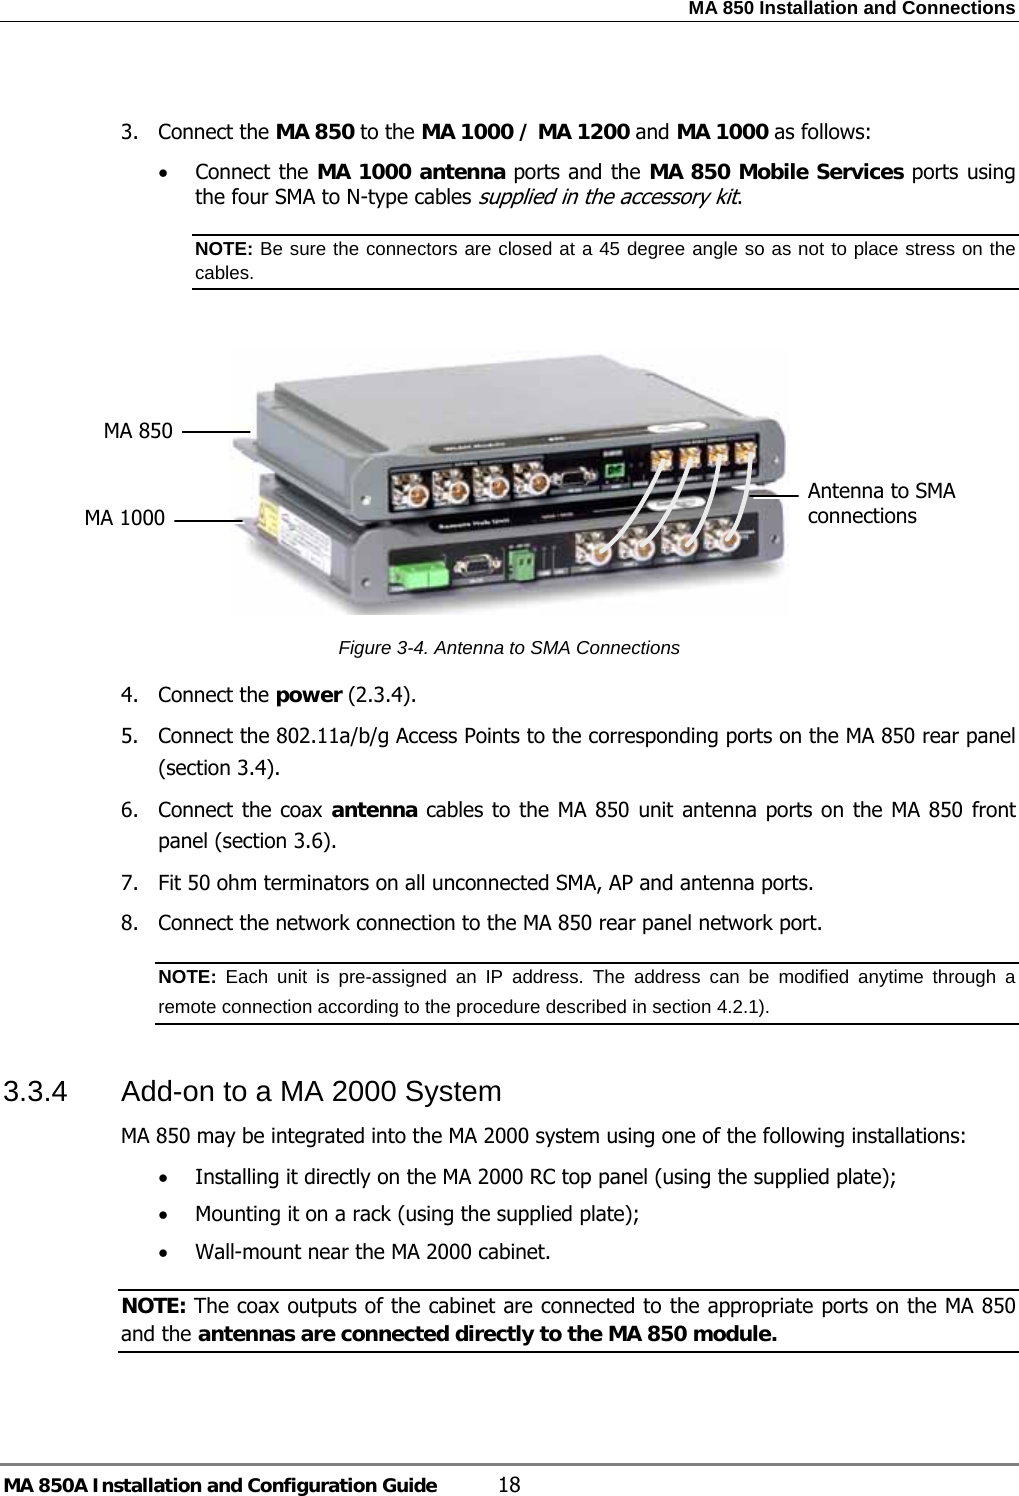 MA 850 Installation and Connections MA 850A Installation and Configuration Guide  18  3. Connect the MA 850 to the MA 1000 / MA 1200 and MA 1000 as follows: • Connect the MA 1000 antenna ports and the MA 850 Mobile Services ports using the four SMA to N-type cables supplied in the accessory kit.  NOTE: Be sure the connectors are closed at a 45 degree angle so as not to place stress on the cables.   Figure  3-4. Antenna to SMA Connections 4. Connect the power ( 2.3.4). 5.  Connect the 802.11a/b/g Access Points to the corresponding ports on the MA 850 rear panel (section  3.4). 6. Connect the coax antenna cables to the MA 850 unit antenna ports on the MA 850 front panel (section  3.6). 7.  Fit 50 ohm terminators on all unconnected SMA, AP and antenna ports. 8.  Connect the network connection to the MA 850 rear panel network port. NOTE:  Each unit is pre-assigned an IP address. The address can be modified anytime through a remote connection according to the procedure described in section  4.2.1).   3.3.4  Add-on to a MA 2000 System  MA 850 may be integrated into the MA 2000 system using one of the following installations: • Installing it directly on the MA 2000 RC top panel (using the supplied plate); • Mounting it on a rack (using the supplied plate); • Wall-mount near the MA 2000 cabinet.  NOTE: The coax outputs of the cabinet are connected to the appropriate ports on the MA 850 and the antennas are connected directly to the MA 850 module.  Antenna to SMA connections MA 850 MA 1000 